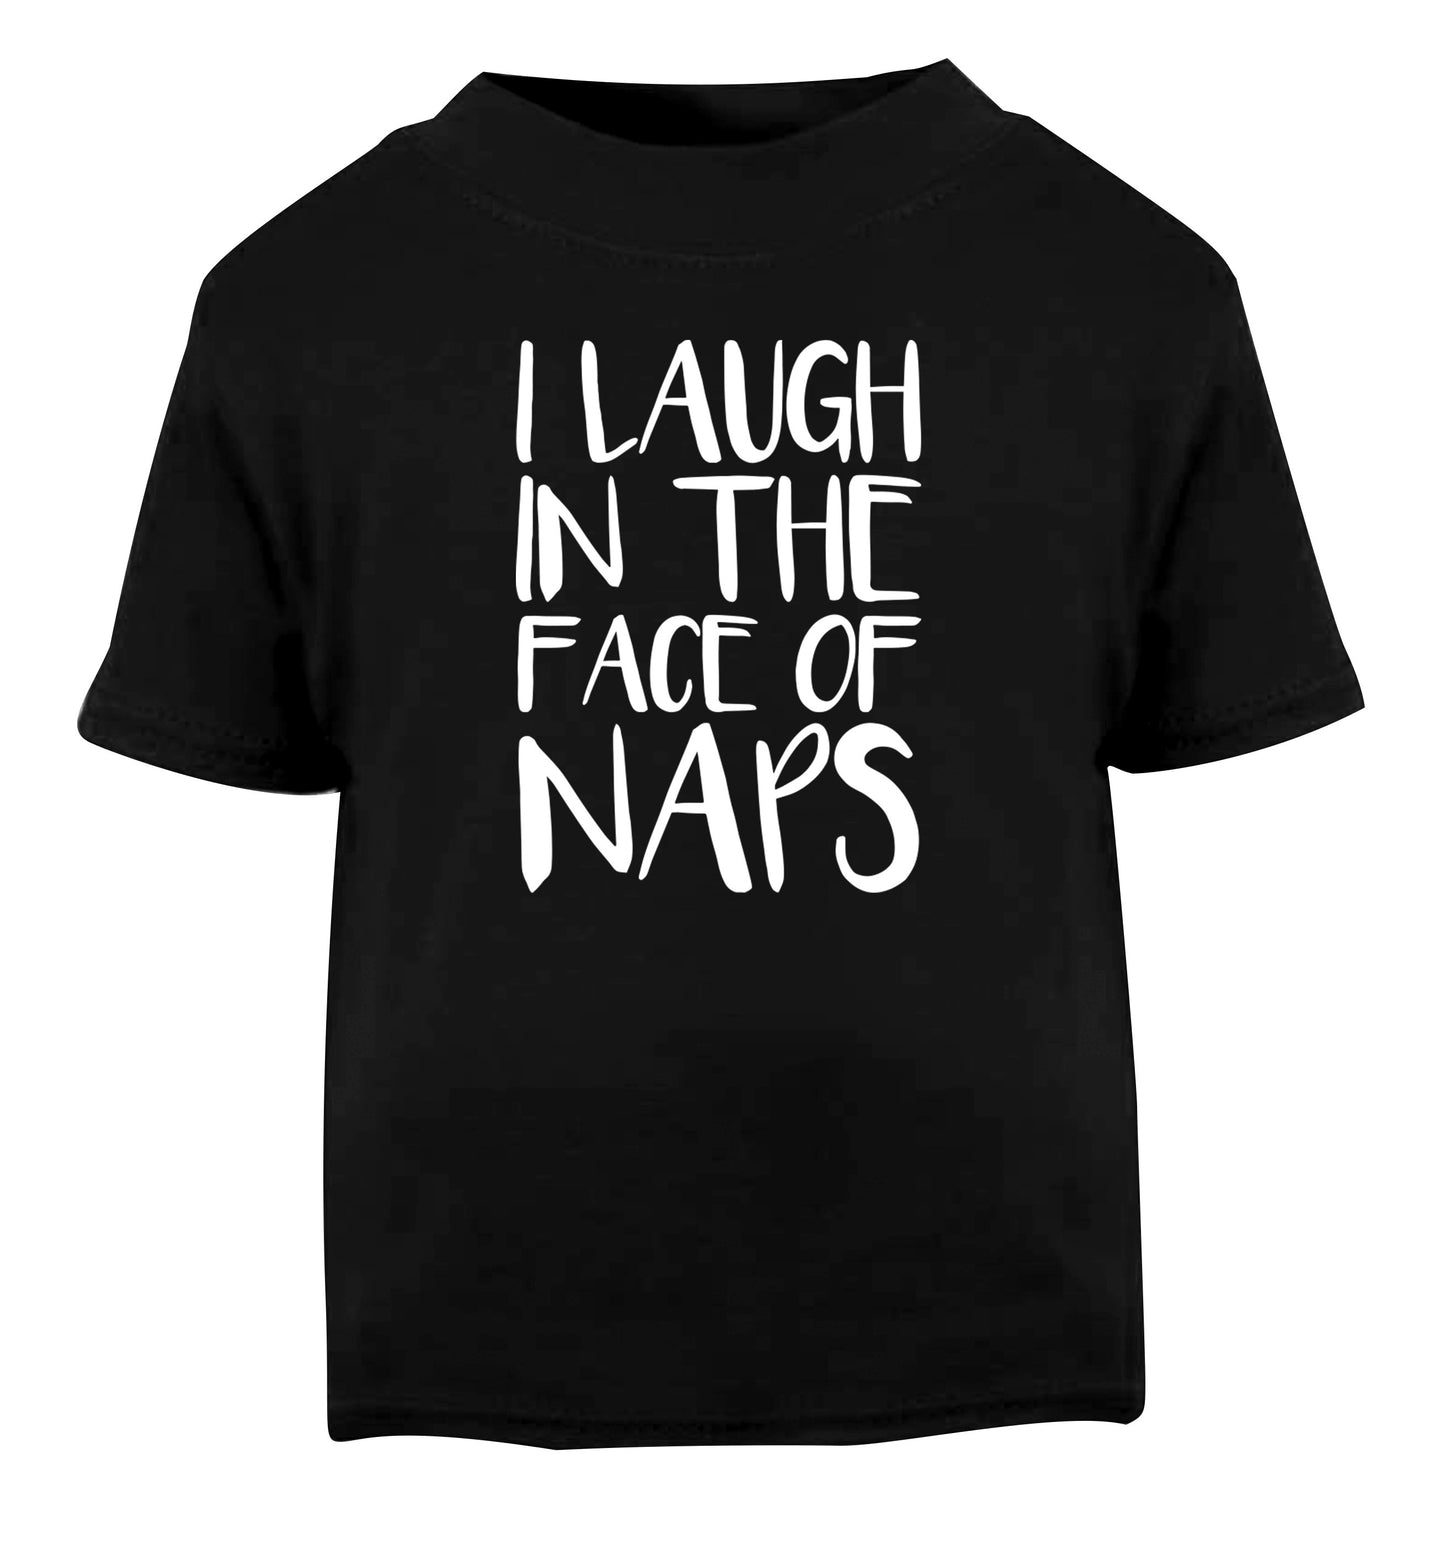 I laugh in the face of naps Black Baby Toddler Tshirt 2 years